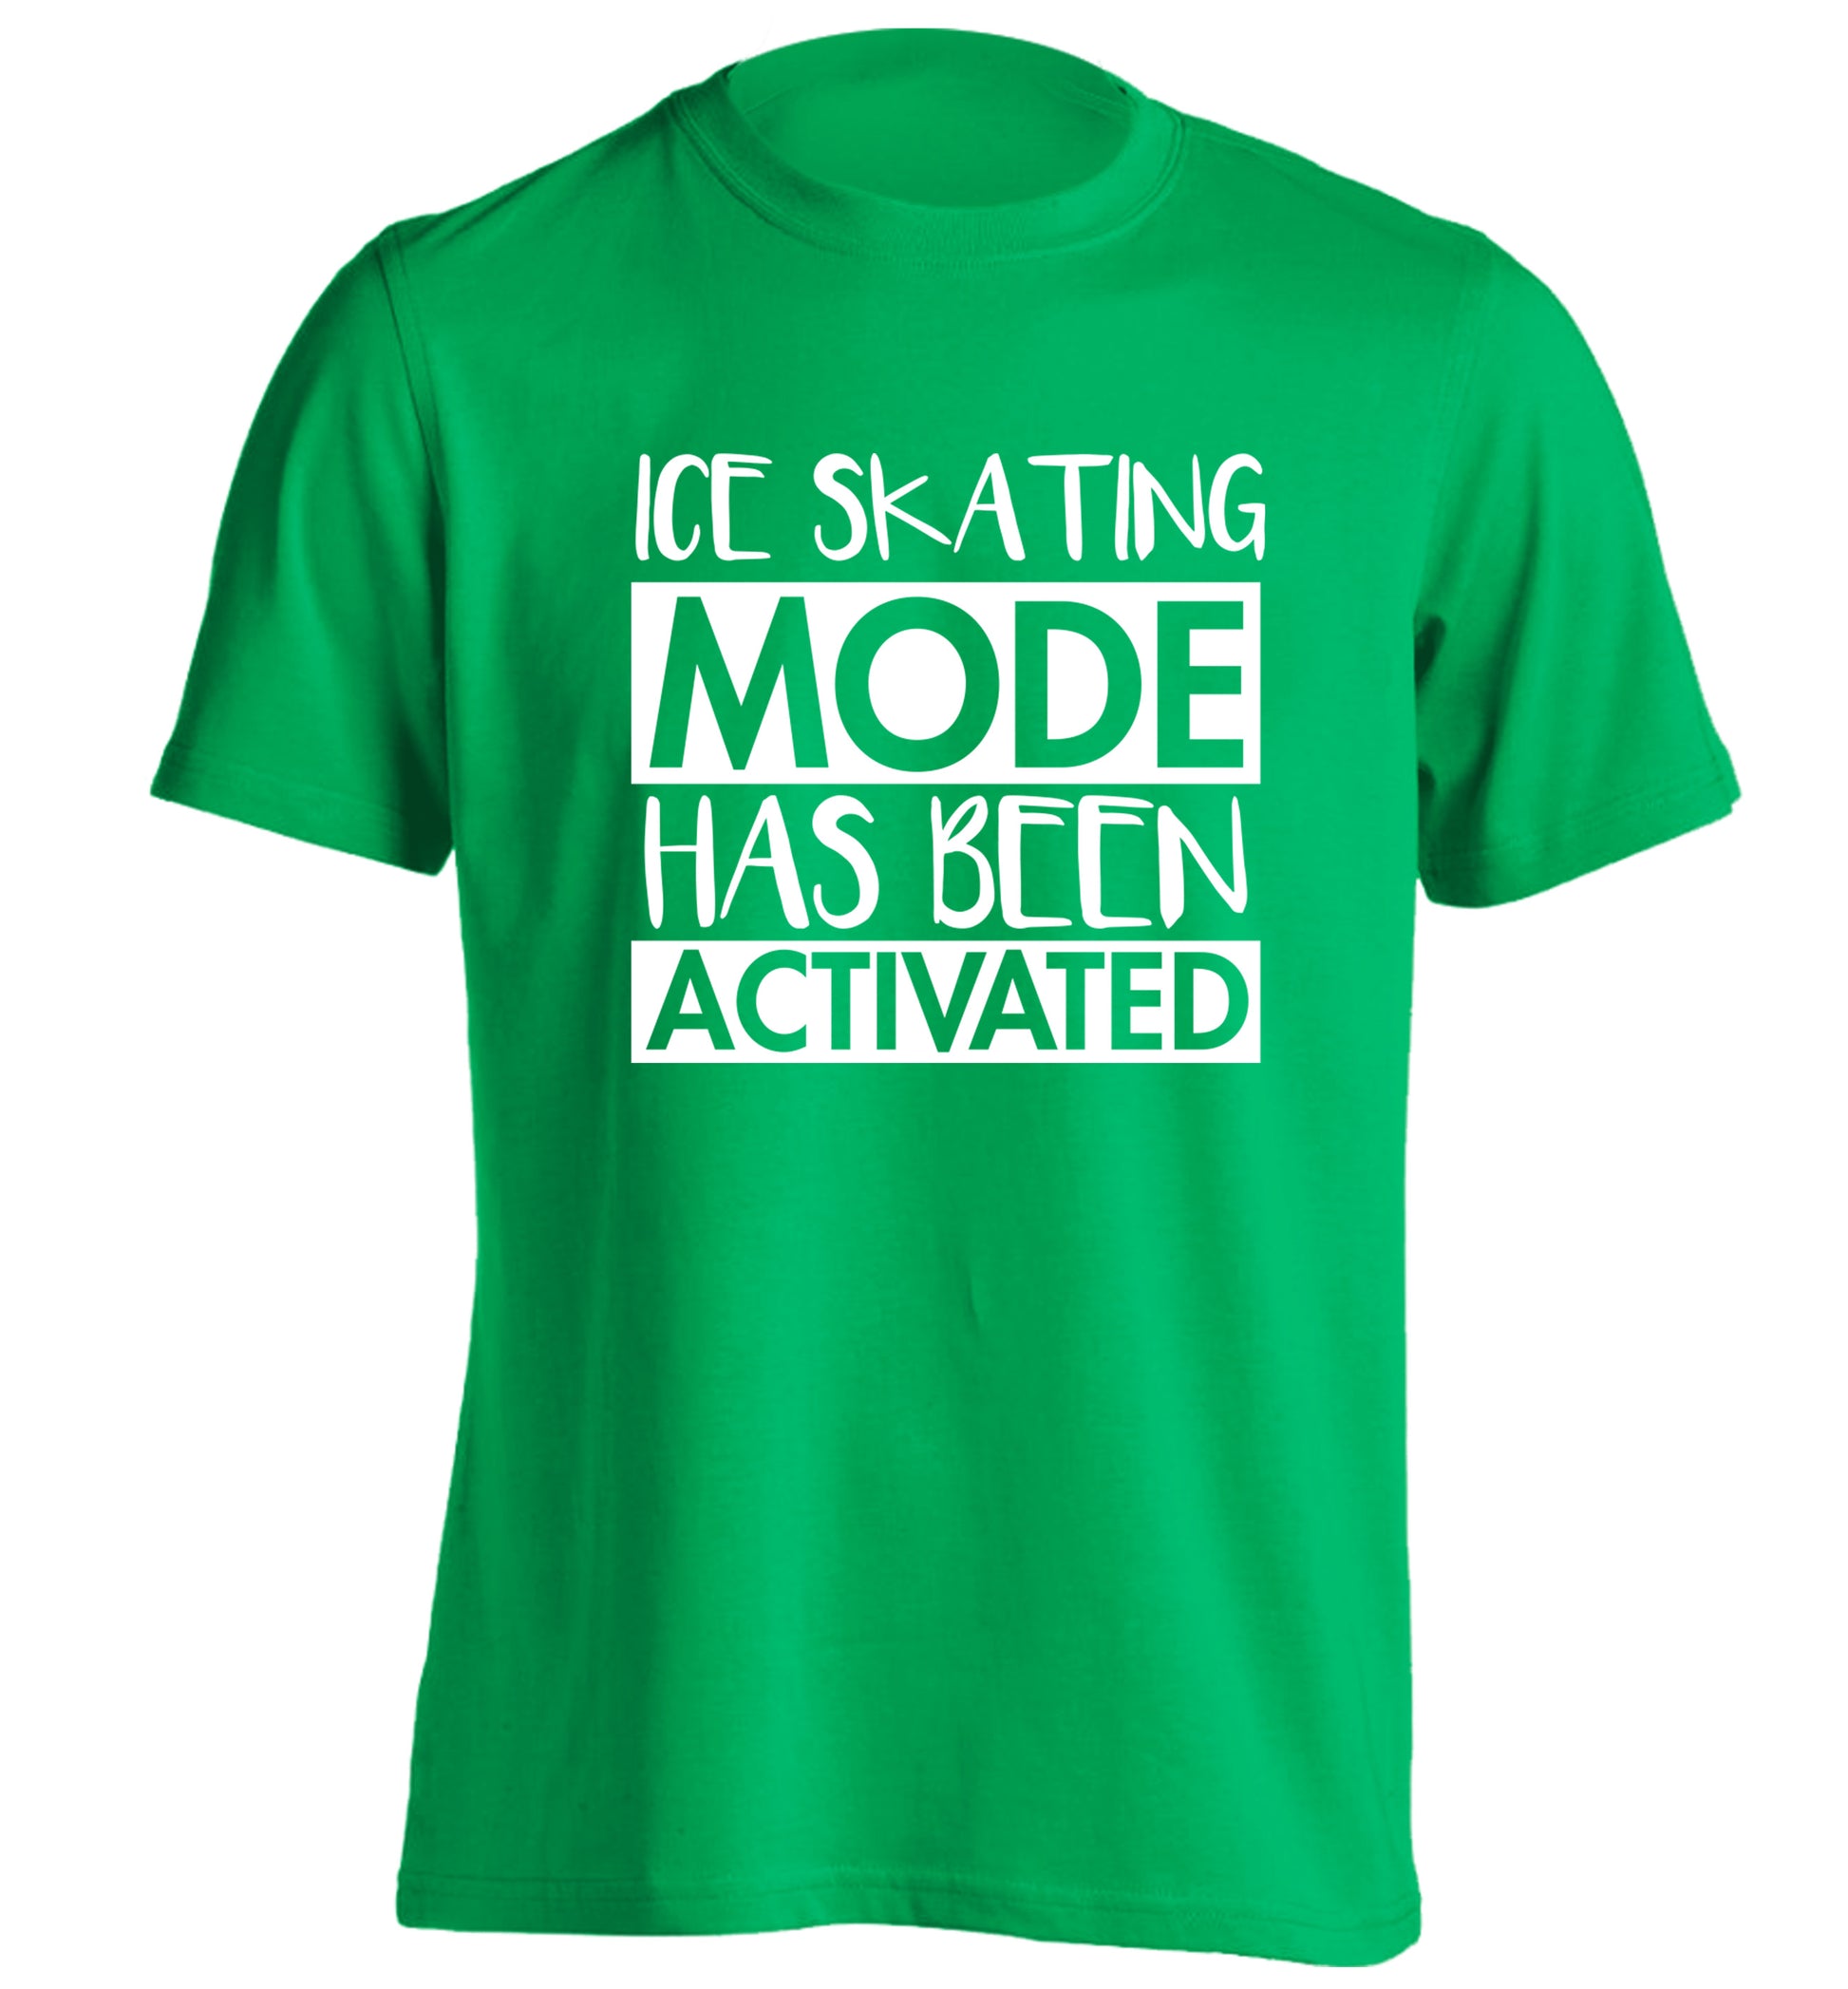 Ice skating mode activated adults unisexgreen Tshirt 2XL